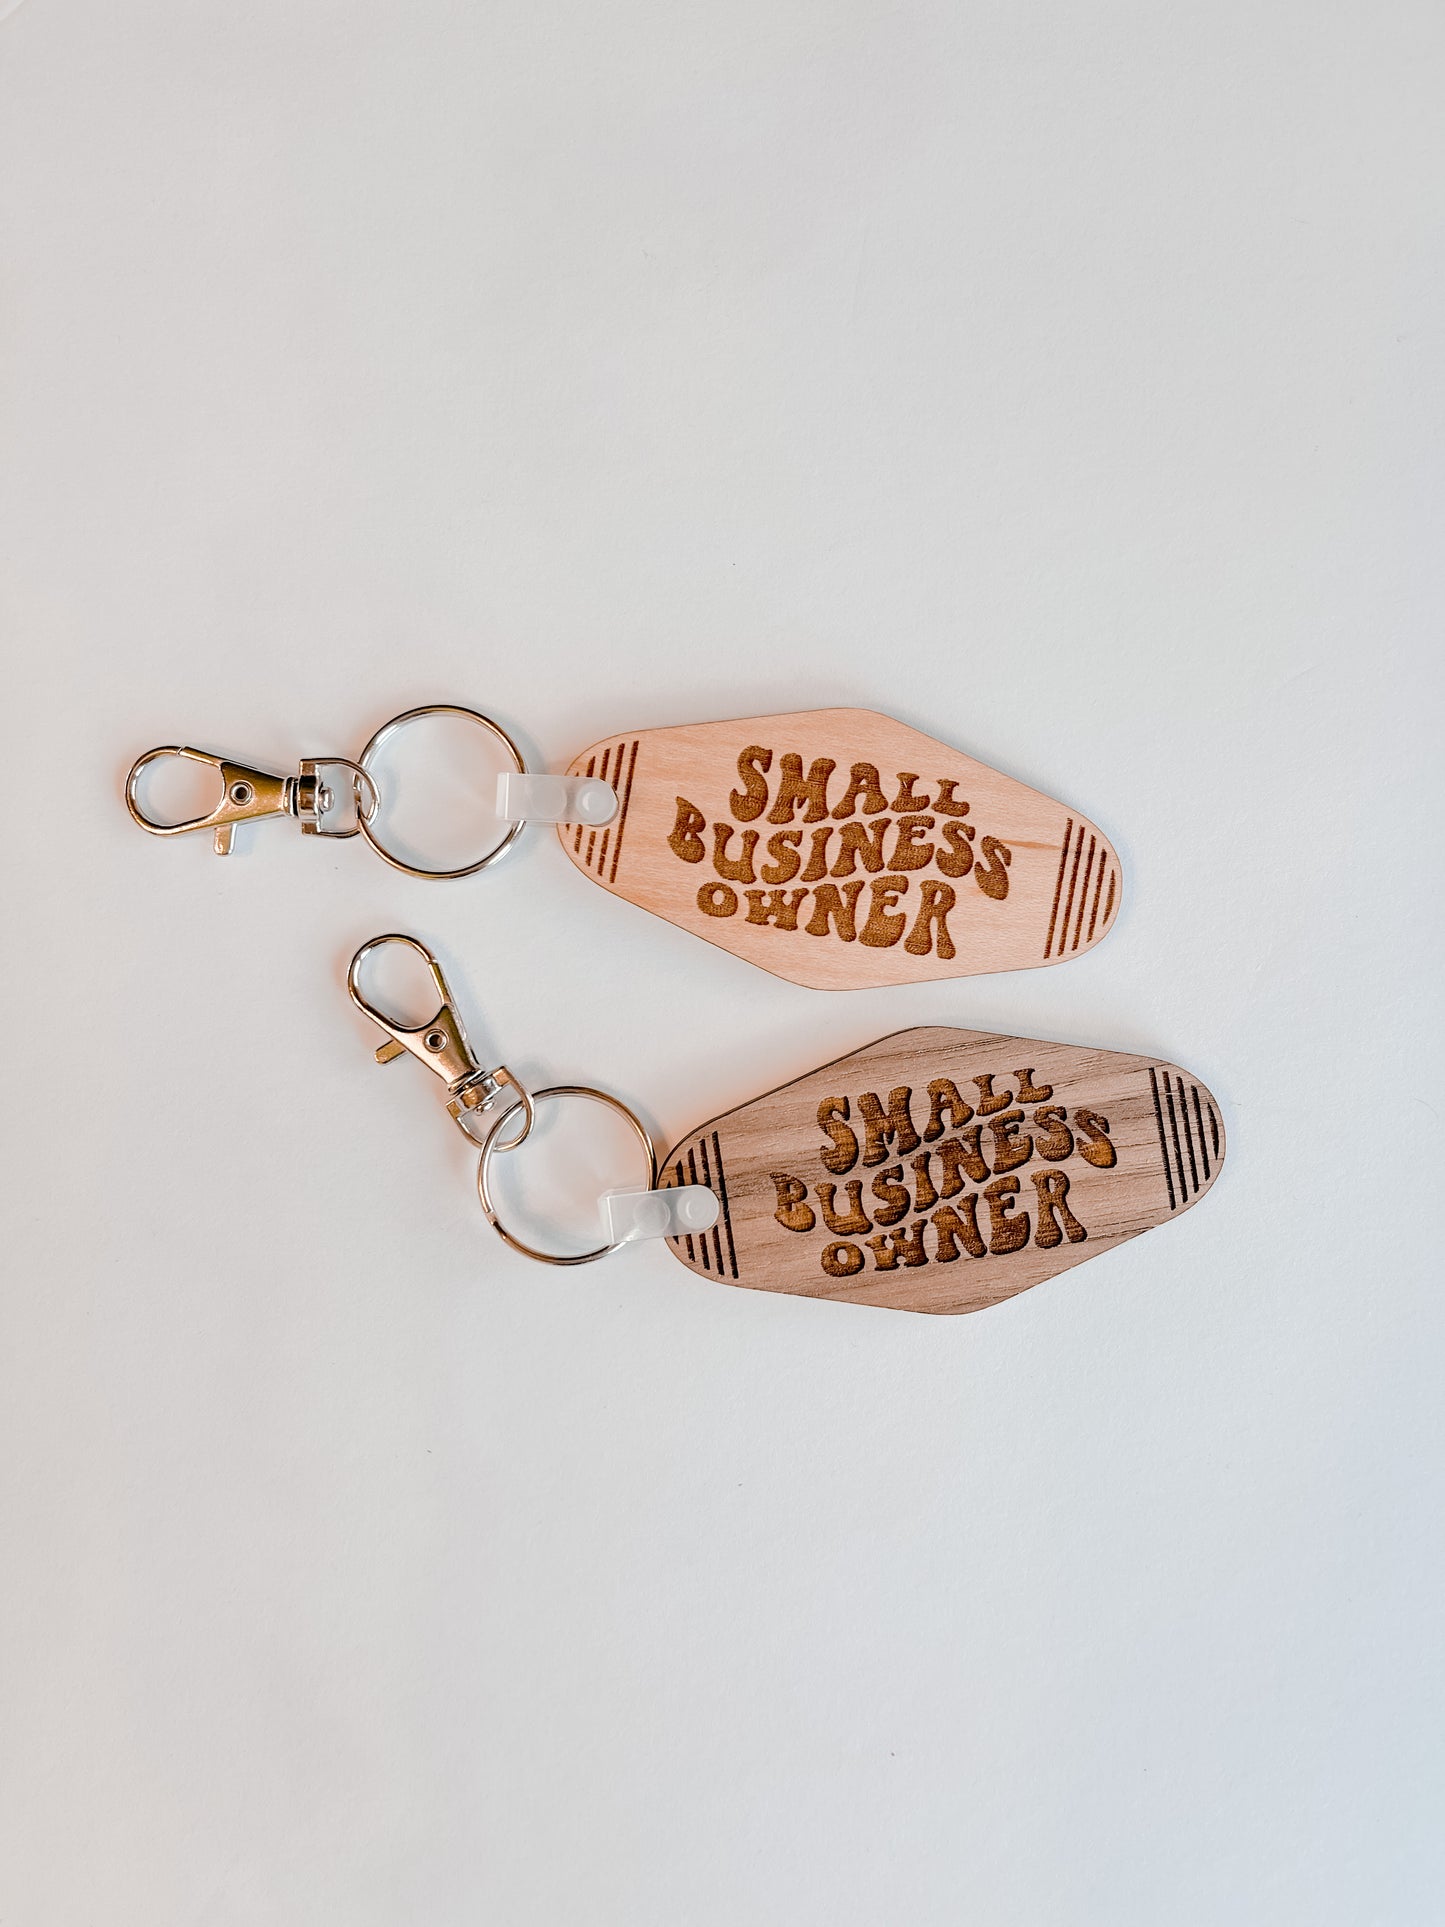 Small Business Owner Motel Keychains